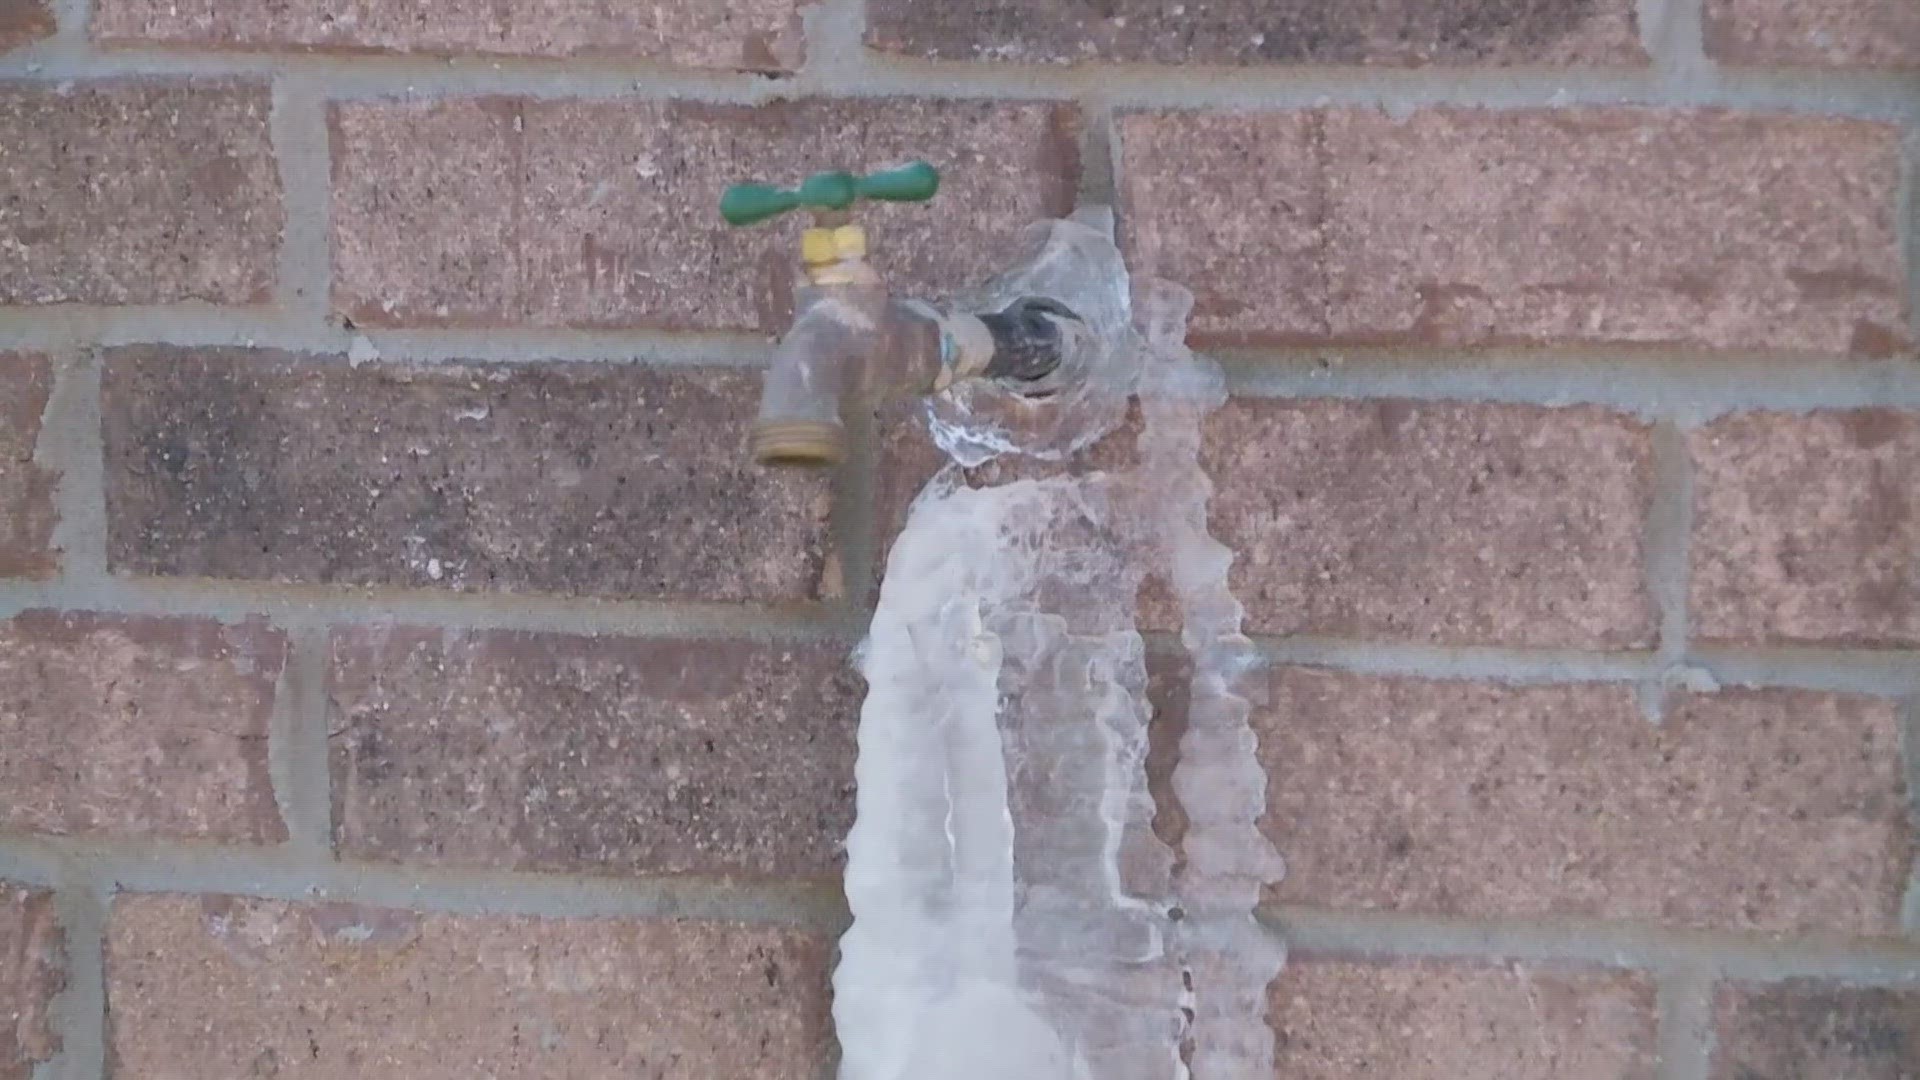 In Jefferson Parish, four parish water lines broke during the cold weather.